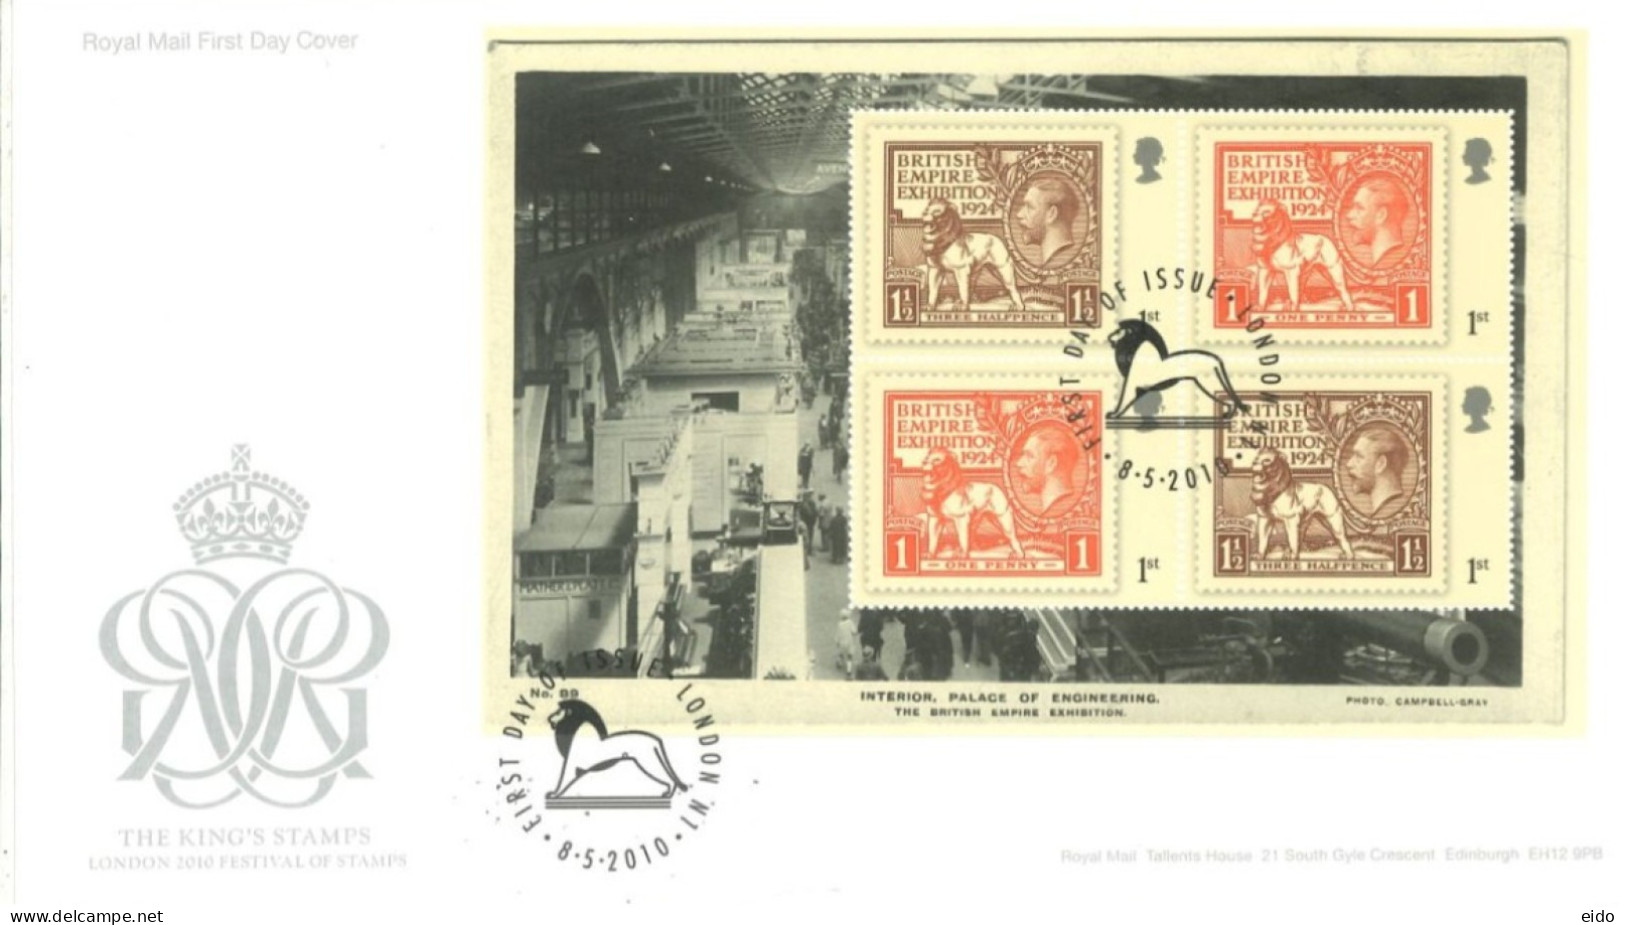 GREAT BRITAIN - 2010, FDC OF MINIATURE SHEET OF THE KING'S STAMPS, LONDON 2010 FESTIVAL OF STAMPS. - Briefe U. Dokumente